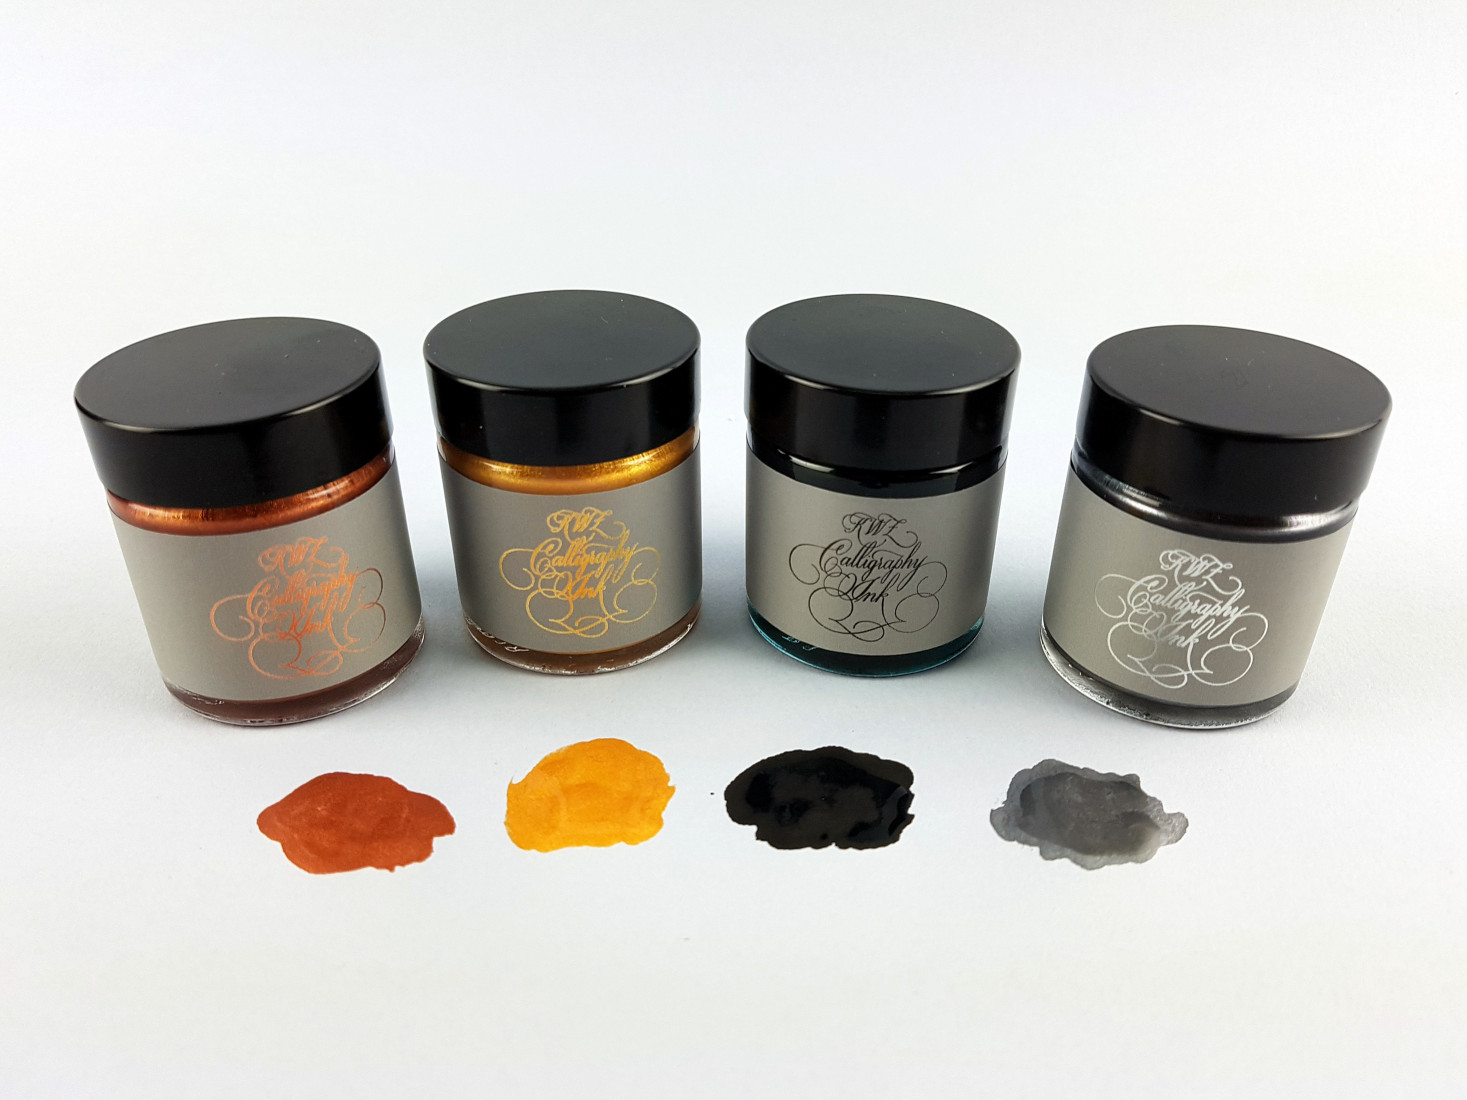 KWZ Calligraphy ink 5401 25g Copper Red for dip pens